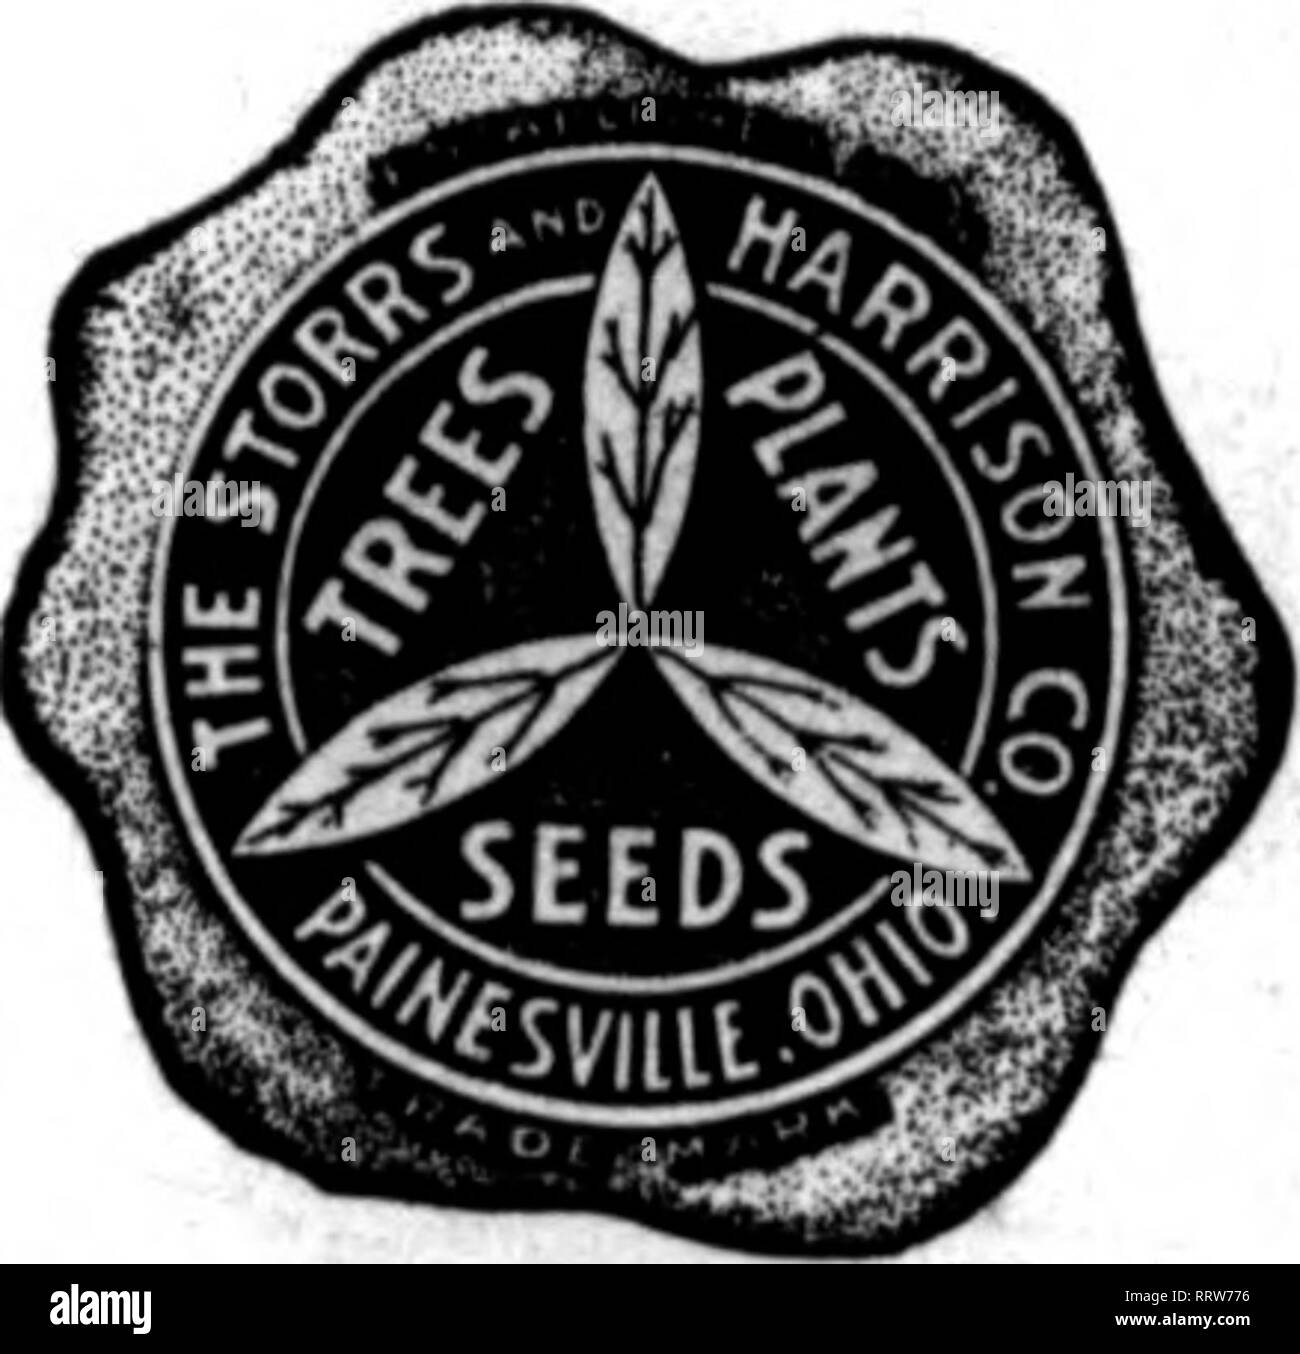 . Florists' review [microform]. Floriculture. 44 Superb Quality&quot; SEEDS FOR FLORISTS THE STORRS &amp; HARRISON CO.'S SUPERB MIXTURE OF GIANT PANSY SEED Contains the Ultlmmte in Giant Pansies. You cannot buy a better mixture of Pansy Seed at any price. Trade Packet, 50c; ^ oz., $1.25; oz., $4.00. We carry in stock all named and separate colors of Oiant Pansies, also the best strains of Odler, Gassier. Butmot. Trimardeau, etc. (See our trade list for prices.) Cineraria Grandiflora Sl&quot;n^rt!rd. p&quot;klt&quot; SJro&quot;i Bellis Perennis (English Daisy) Lonarfellow (red). Snowball (whit Stock Photo